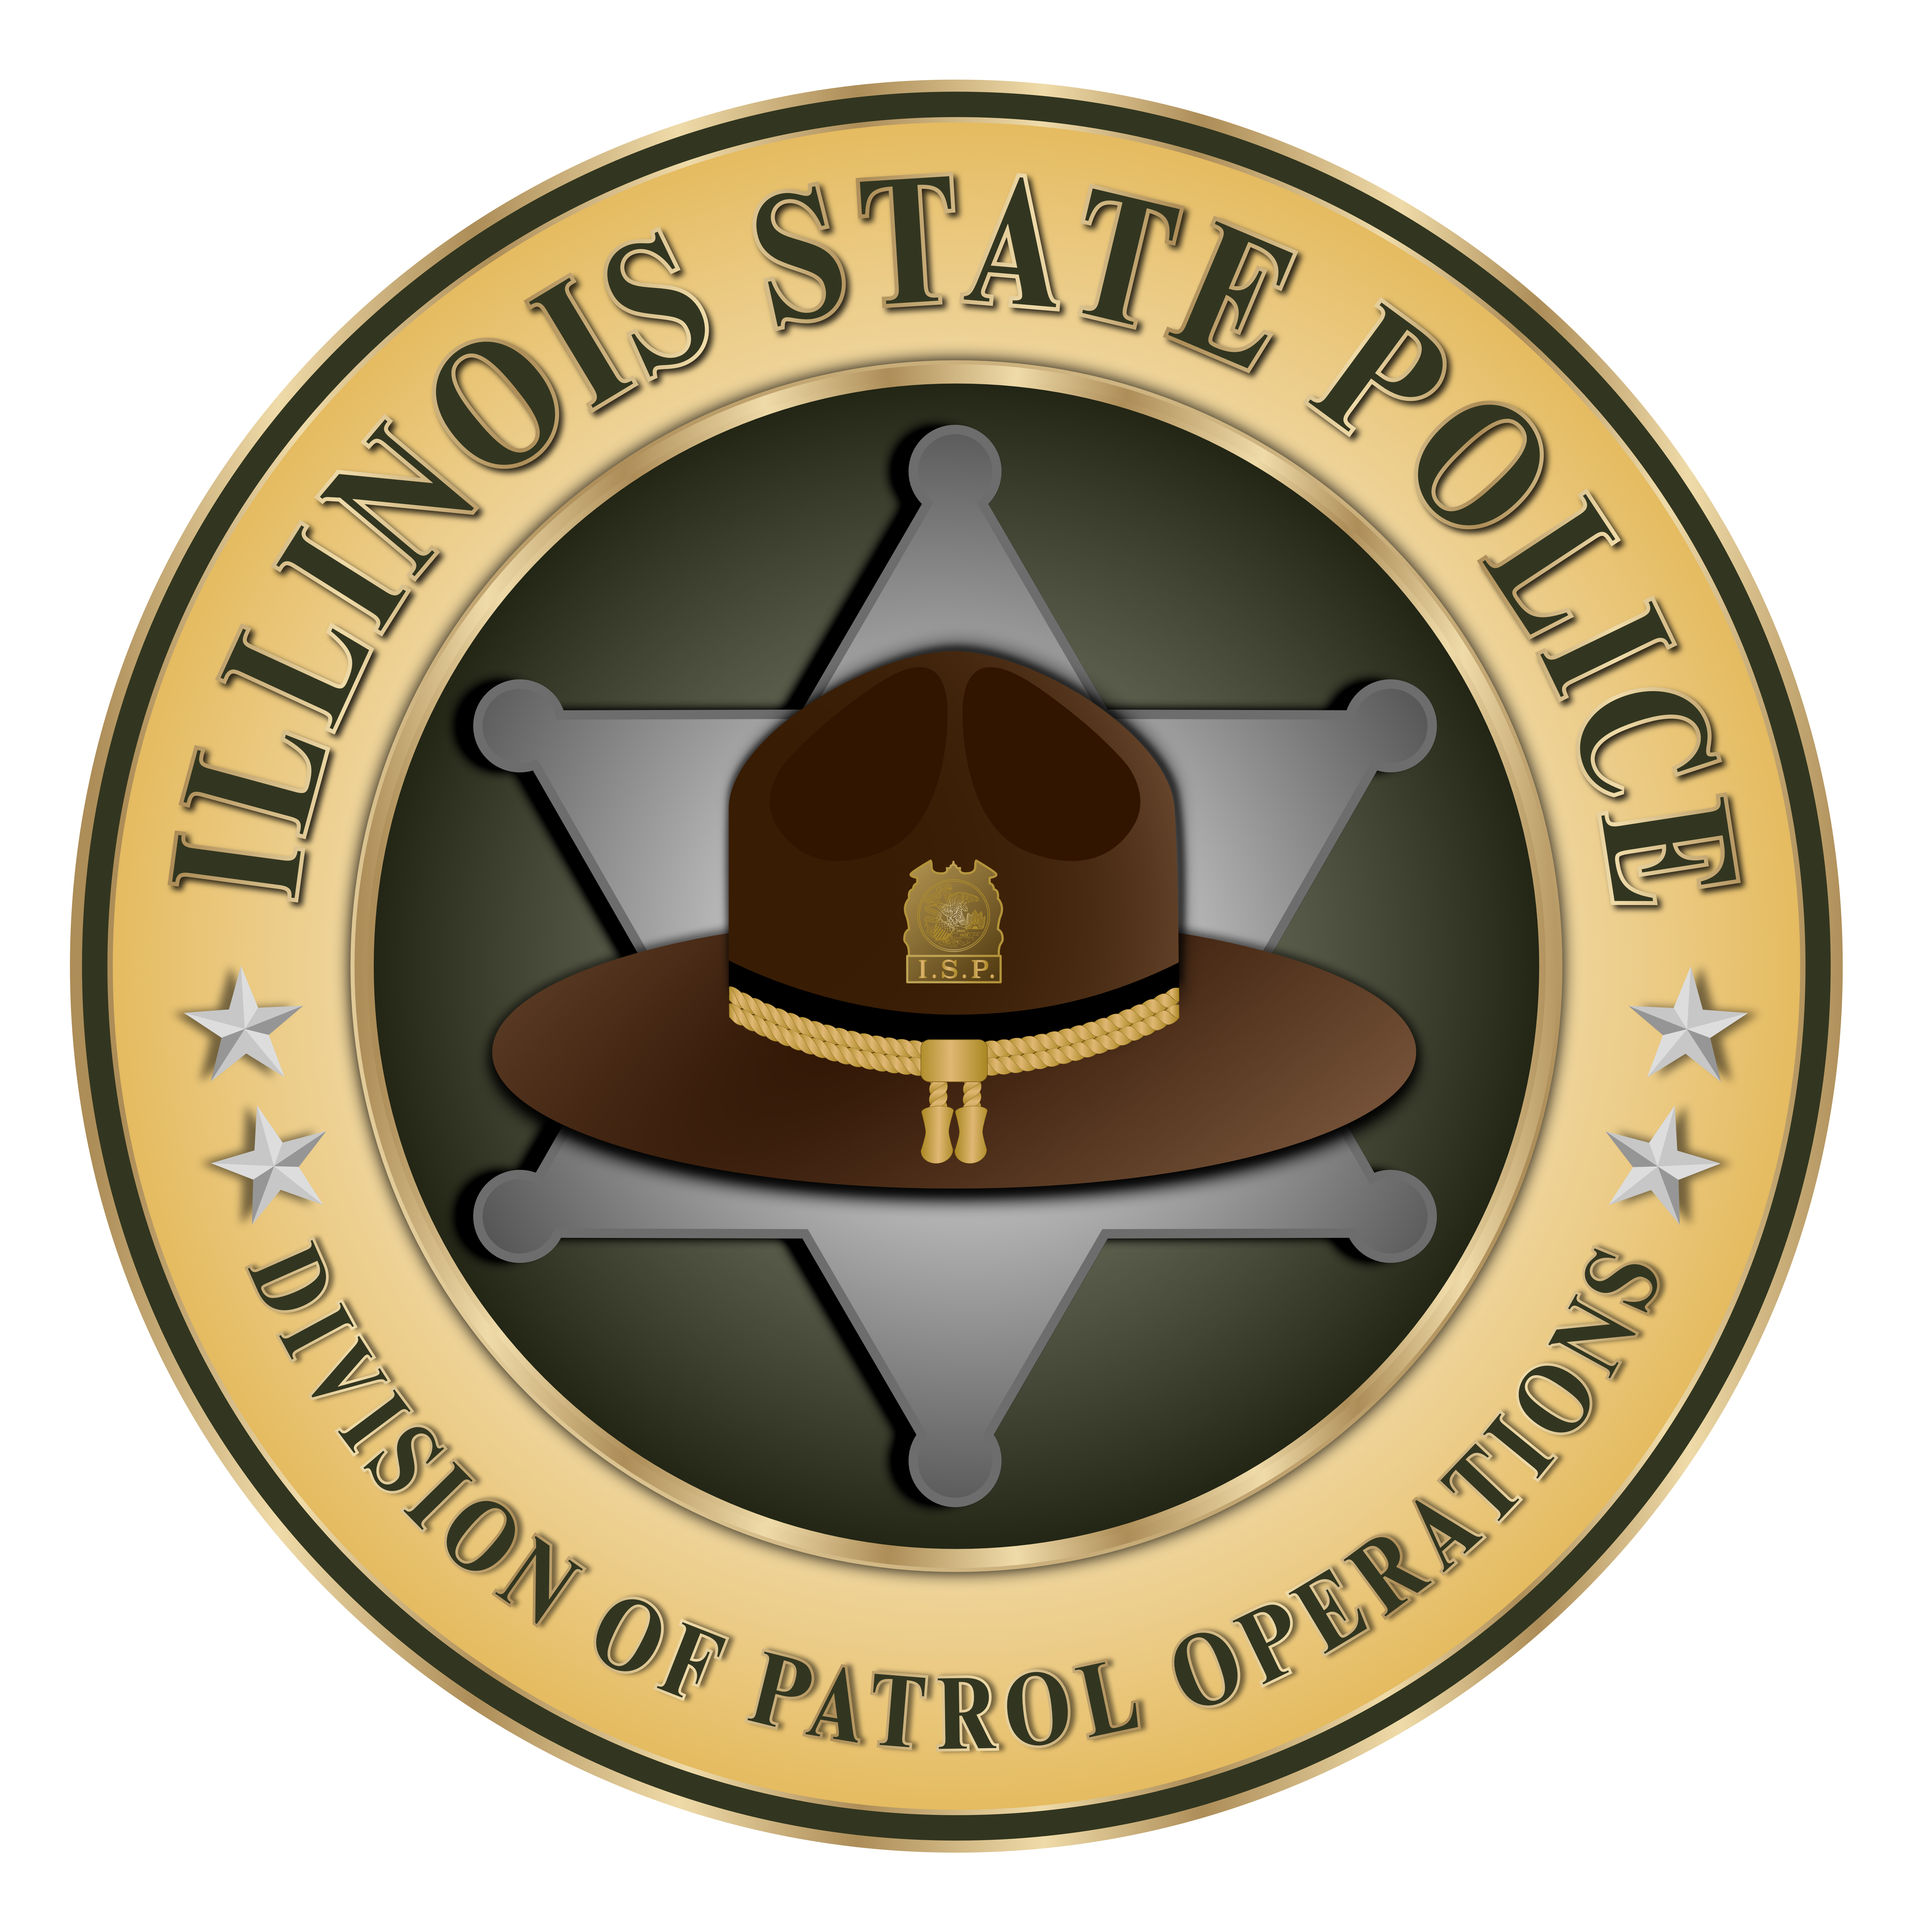 Illinois State Police Seal